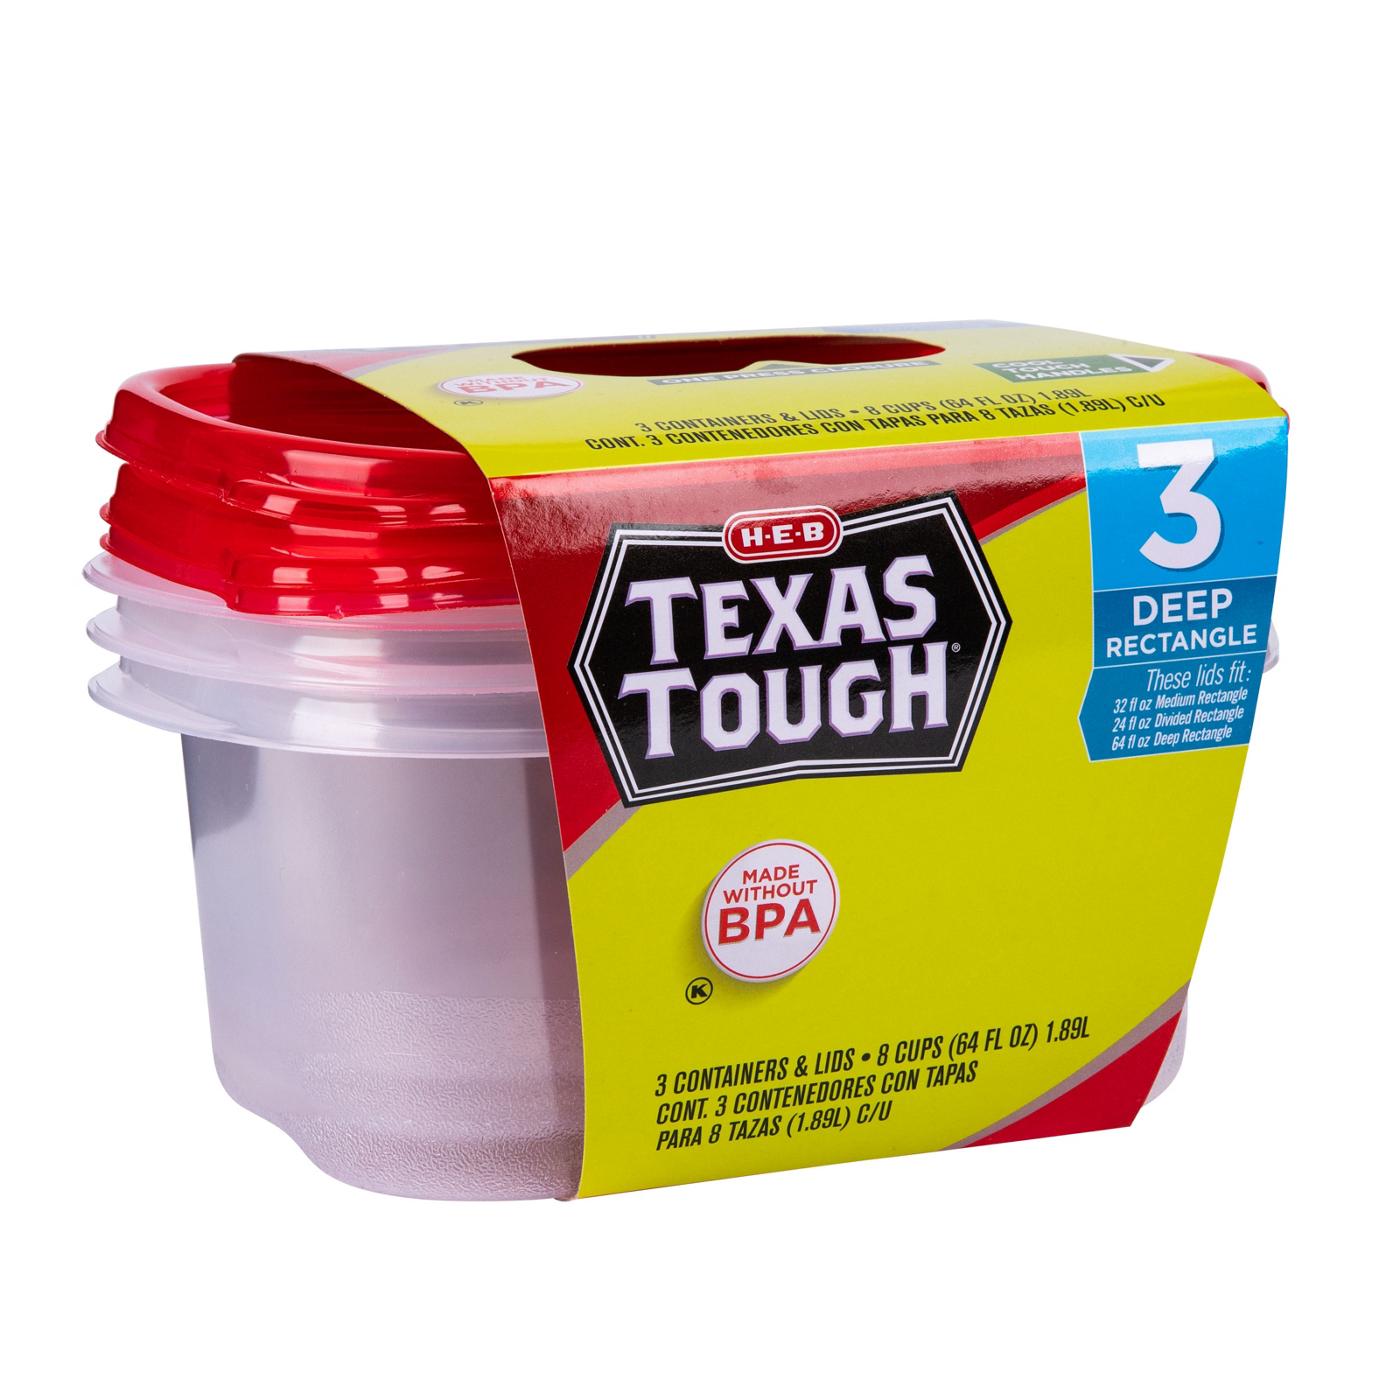 H-E-B Texas Tough Medium Square Reusable Containers with Lids - Shop  Containers at H-E-B